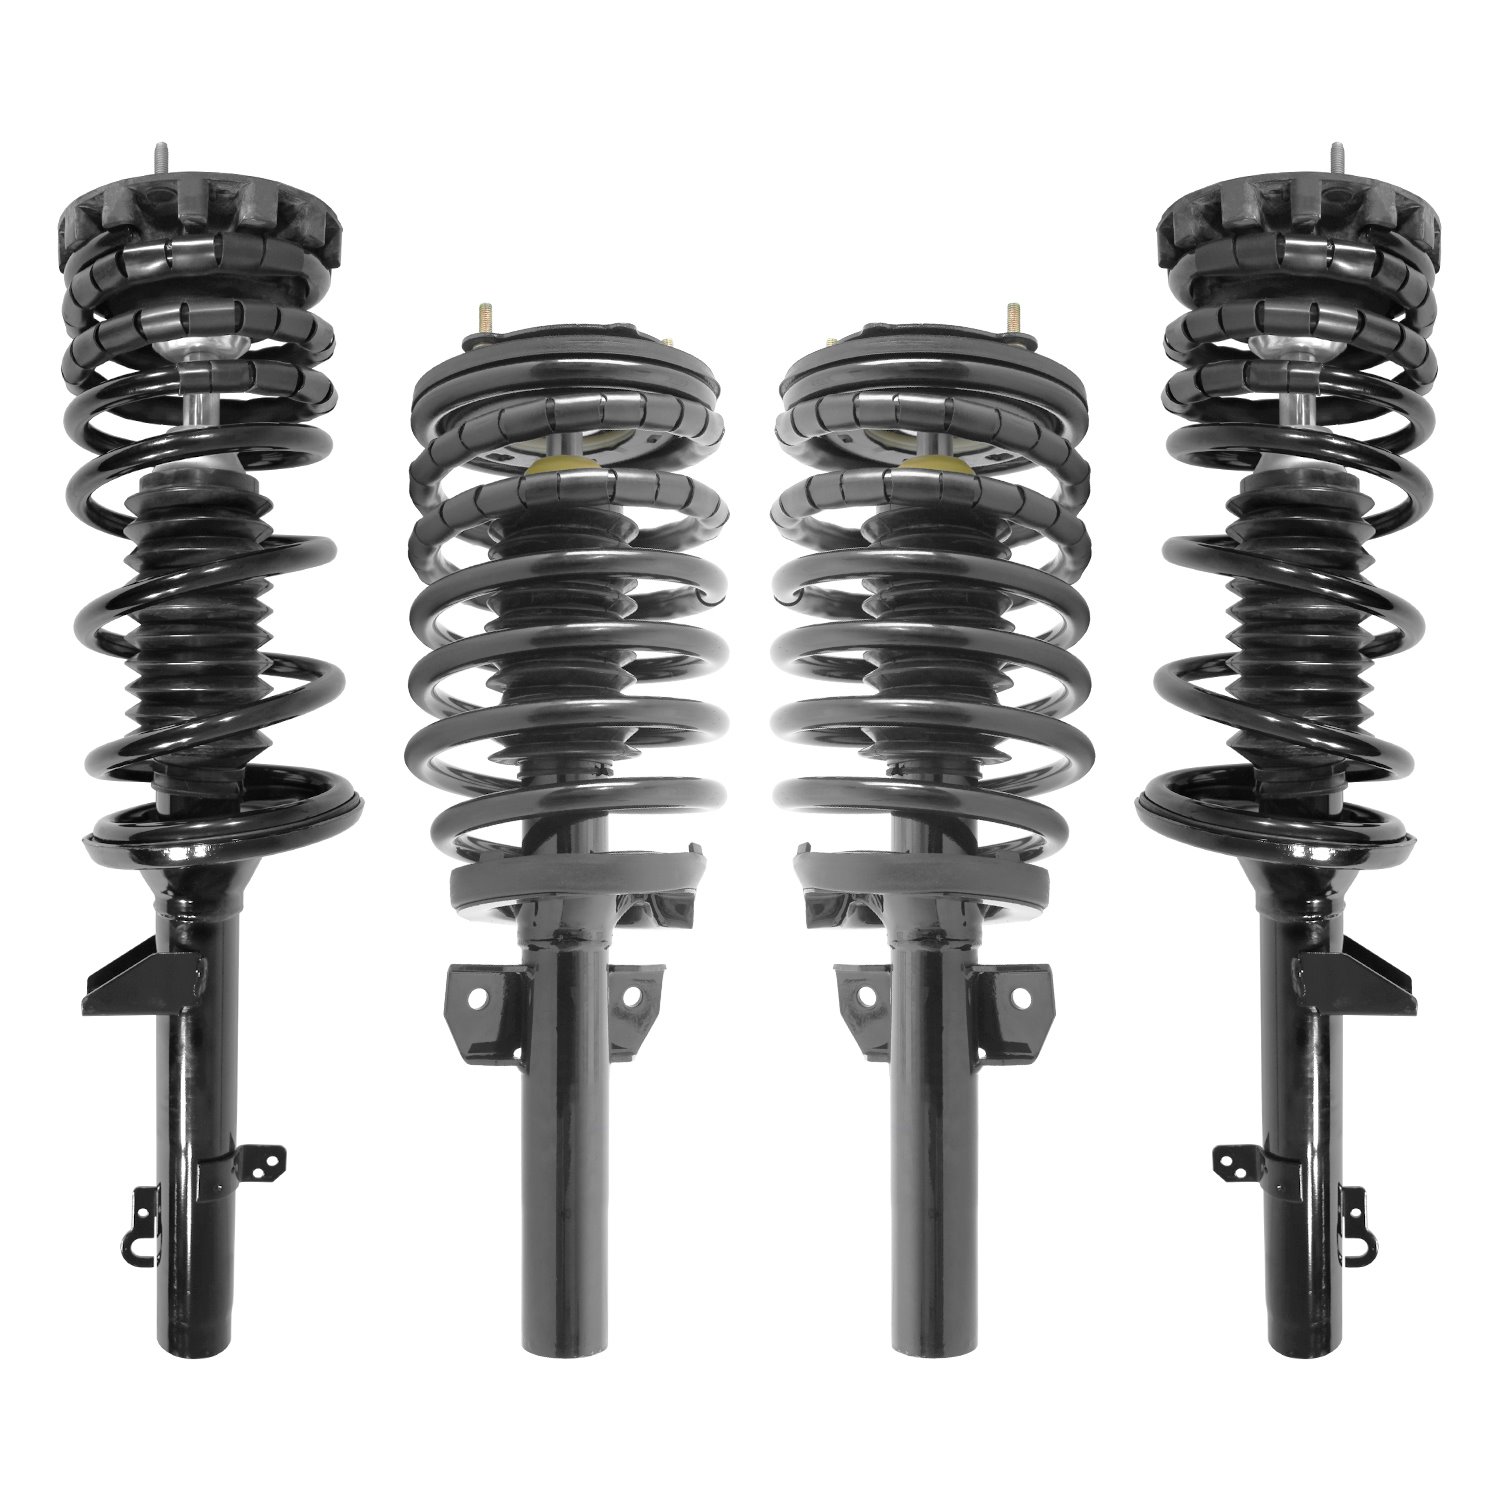 4-11310-15250-001 Front & Rear Suspension Strut & Coil Spring Assembly Kit Fits Select Ford Taurus, Mercury Sable